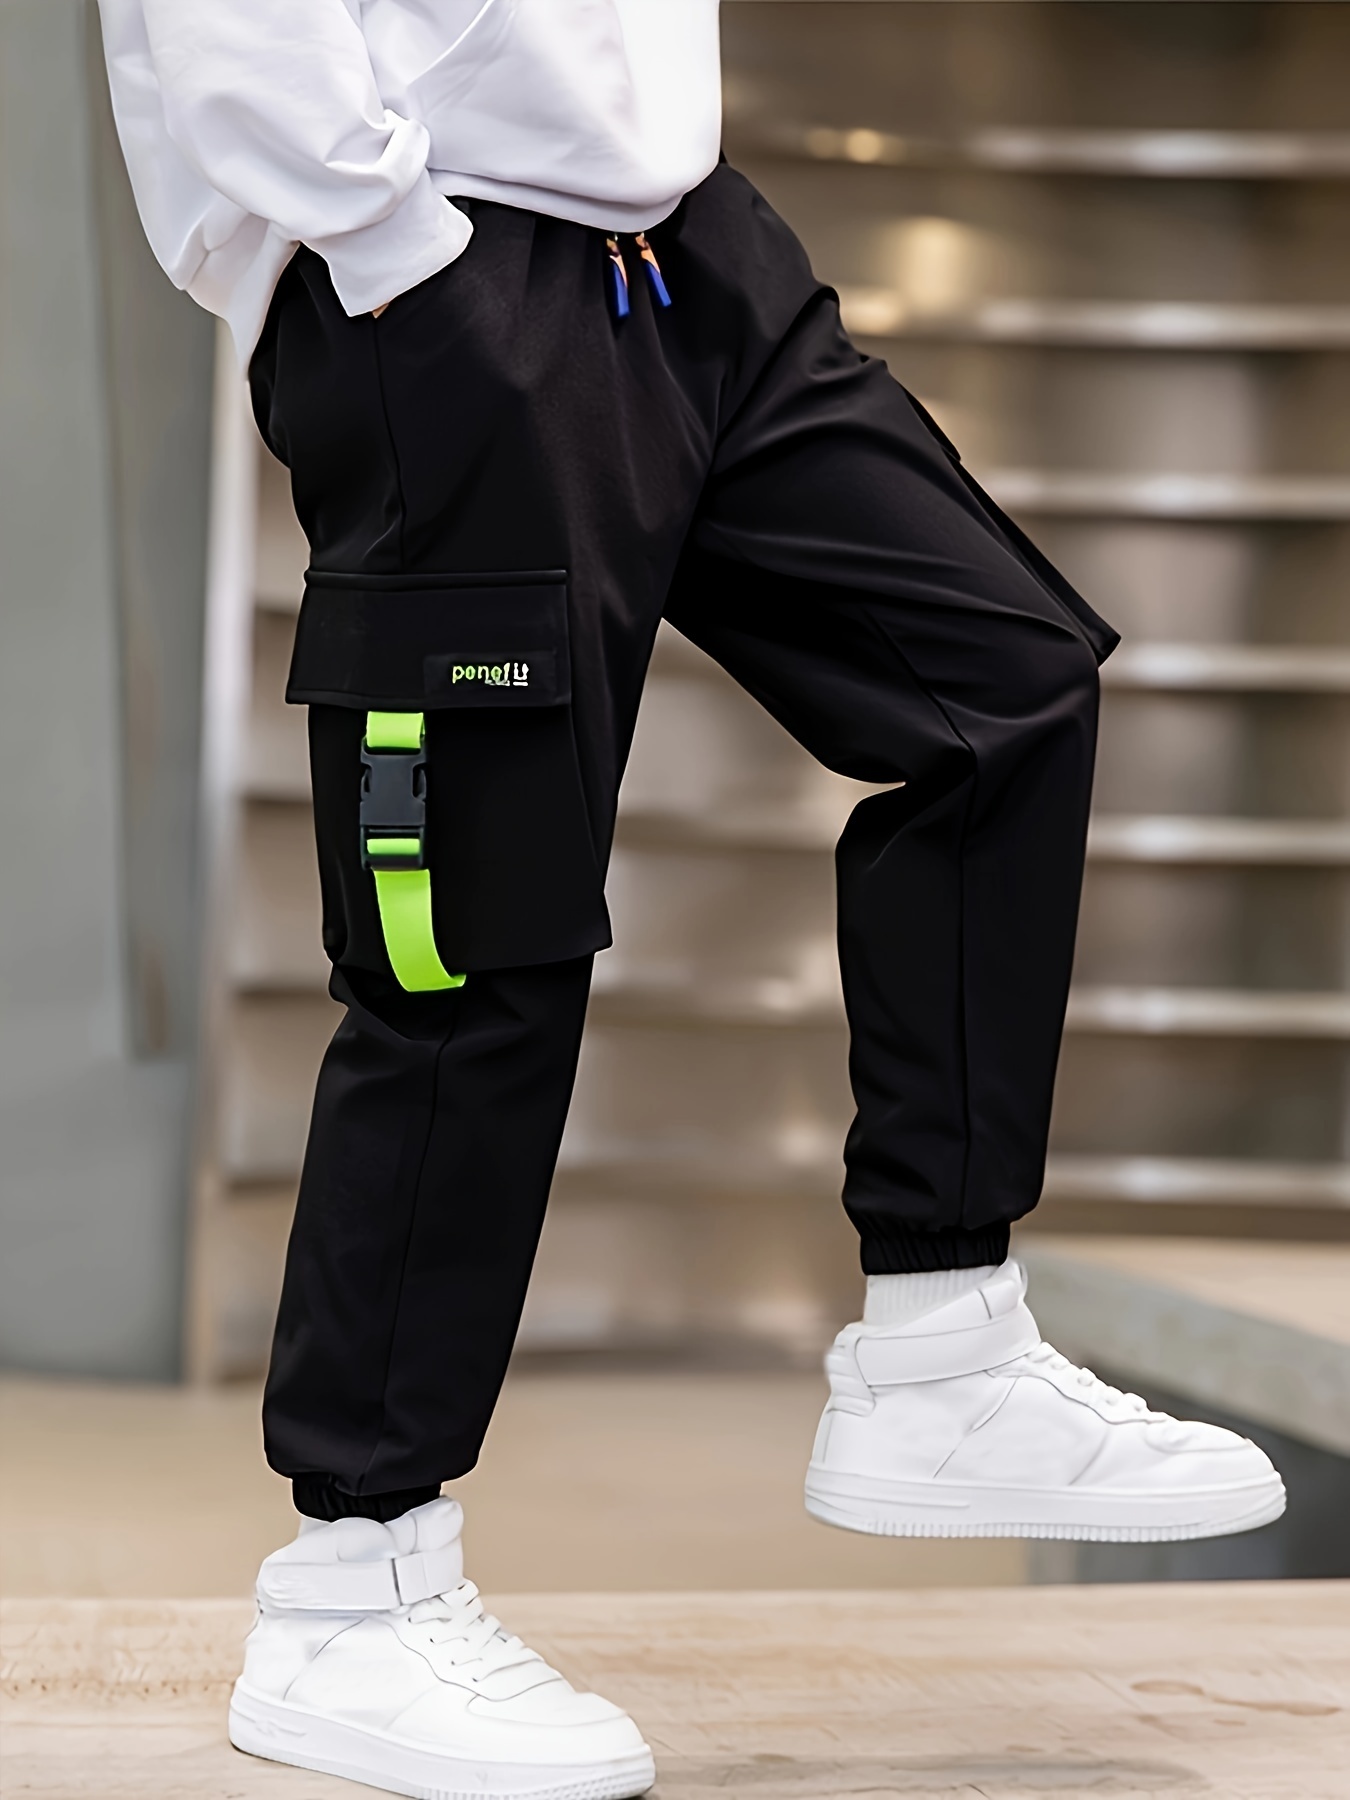 New Arrival Big Boys Jeans Trousers Spring 2020 Teen Boys Pants